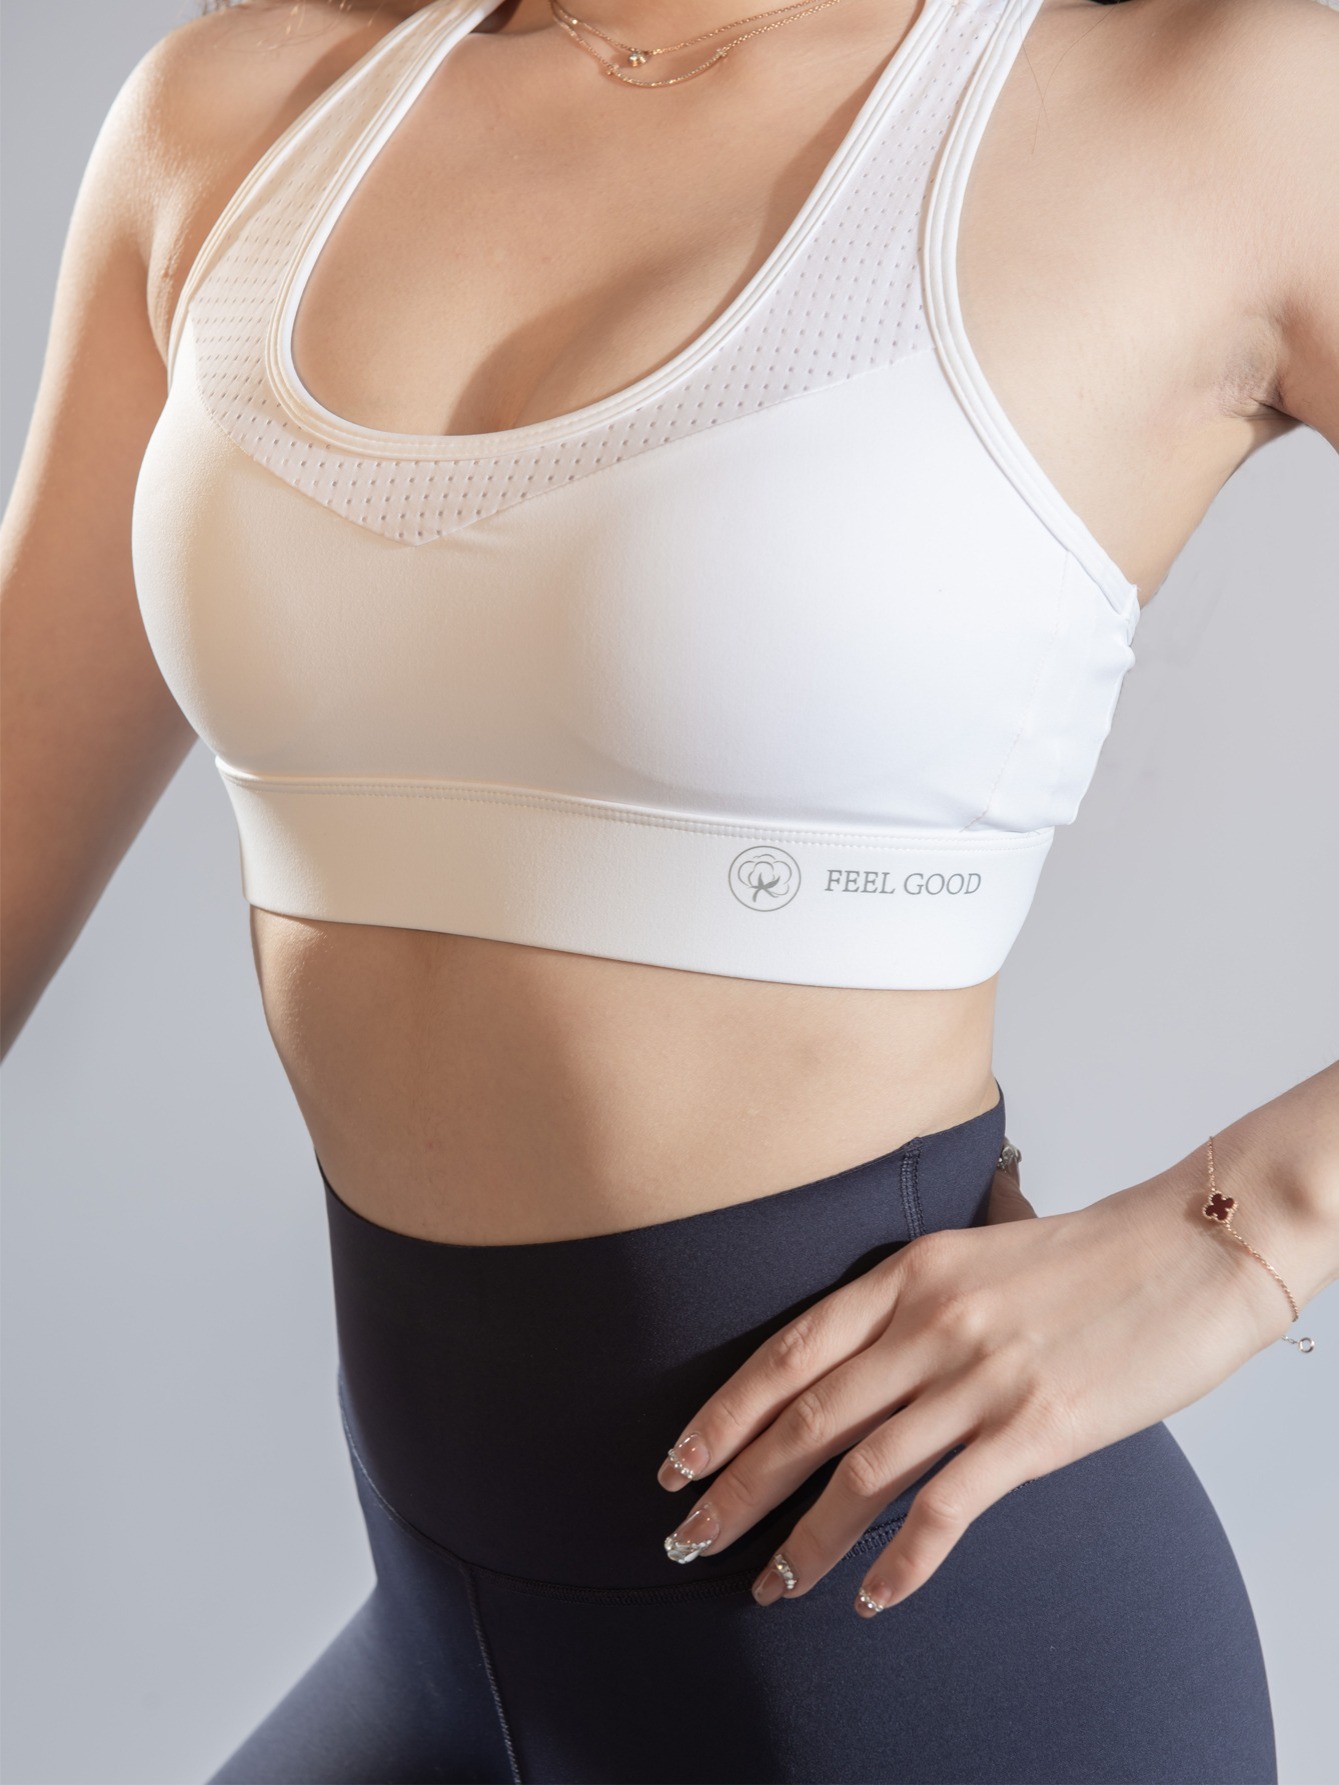 Fitness: Does your bra support your workout?